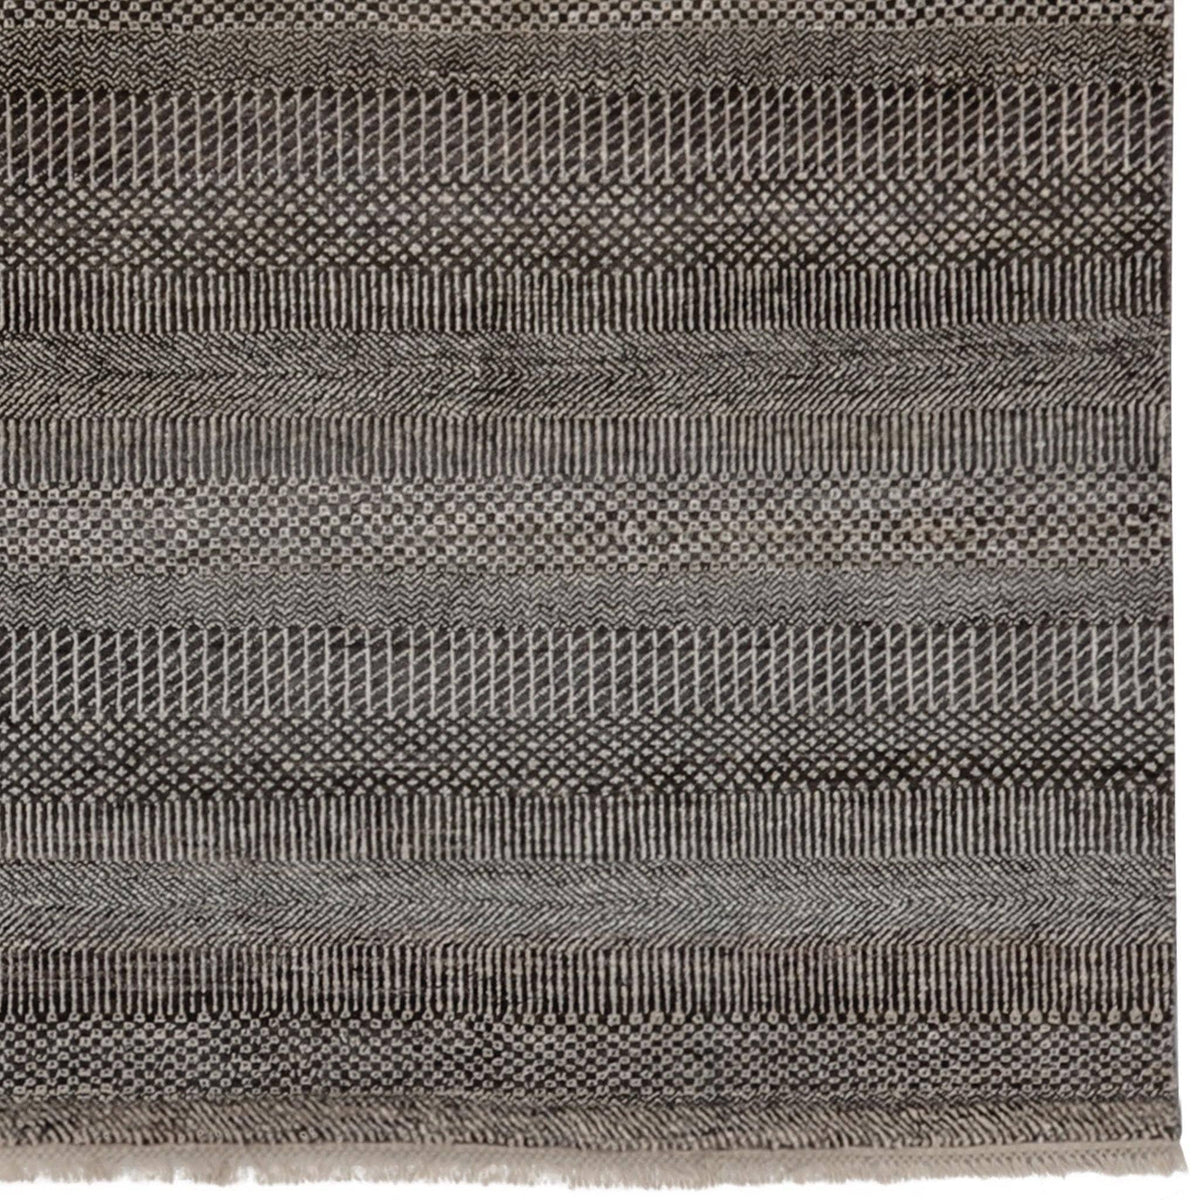 Fine Hand-knotted Wool Contemporary Rug 157cm x 211cm